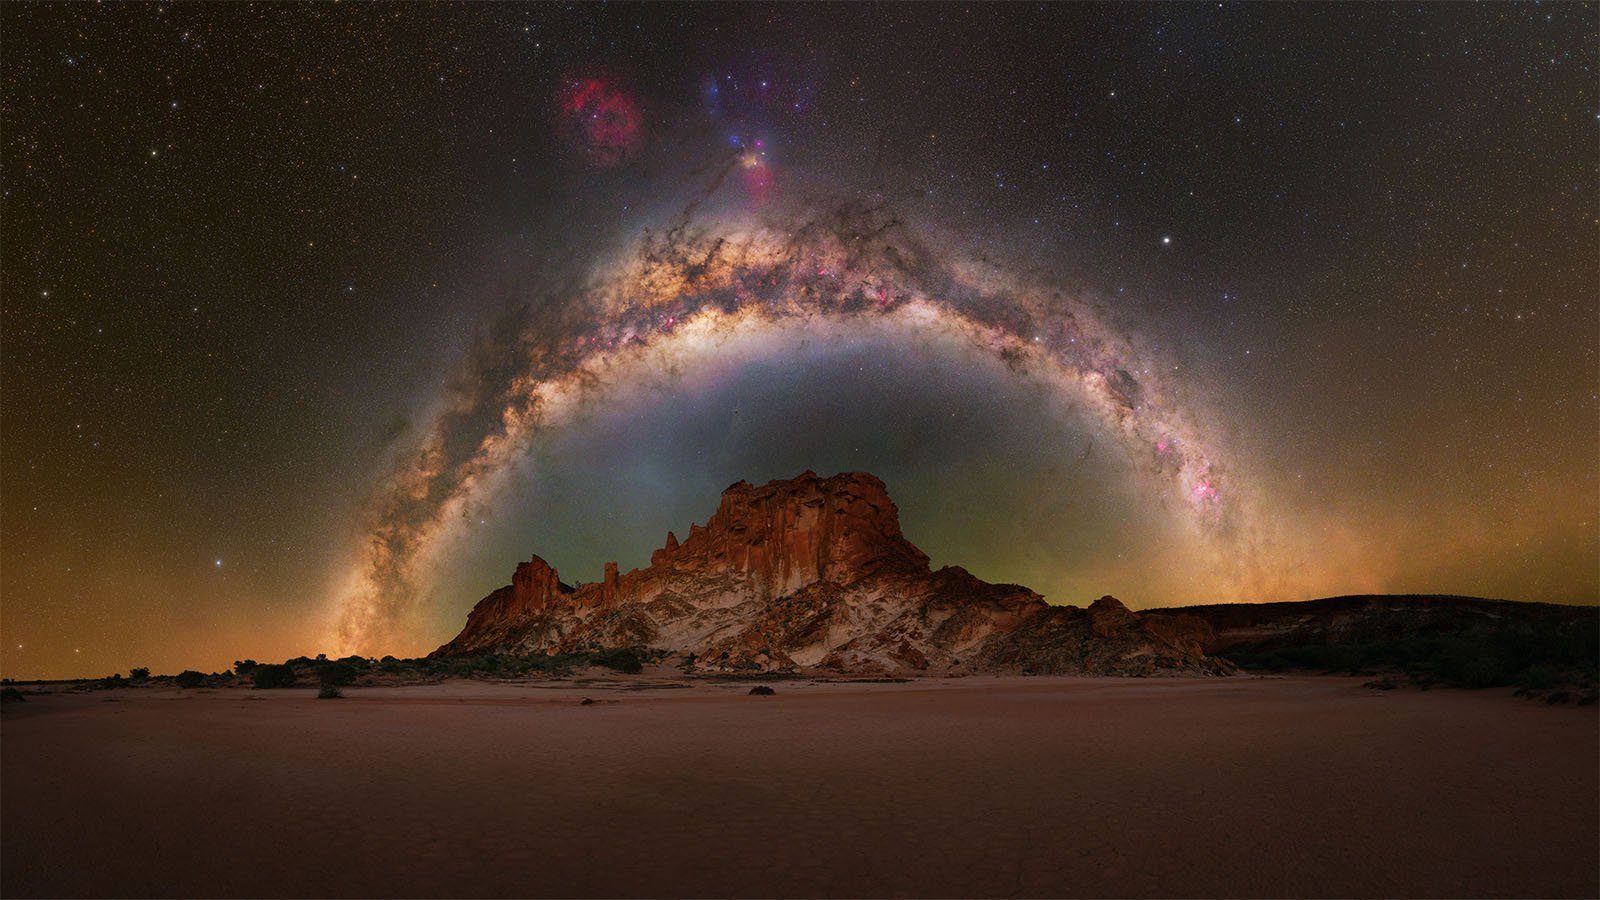  A mesmerizing night sky showcases a vividly colorful Milky Way arching over a rugged, rocky landscape. The terrain features scattered brush and a prominent cliff formation, illuminated by the brilliant starlight against a clear, dark sky.